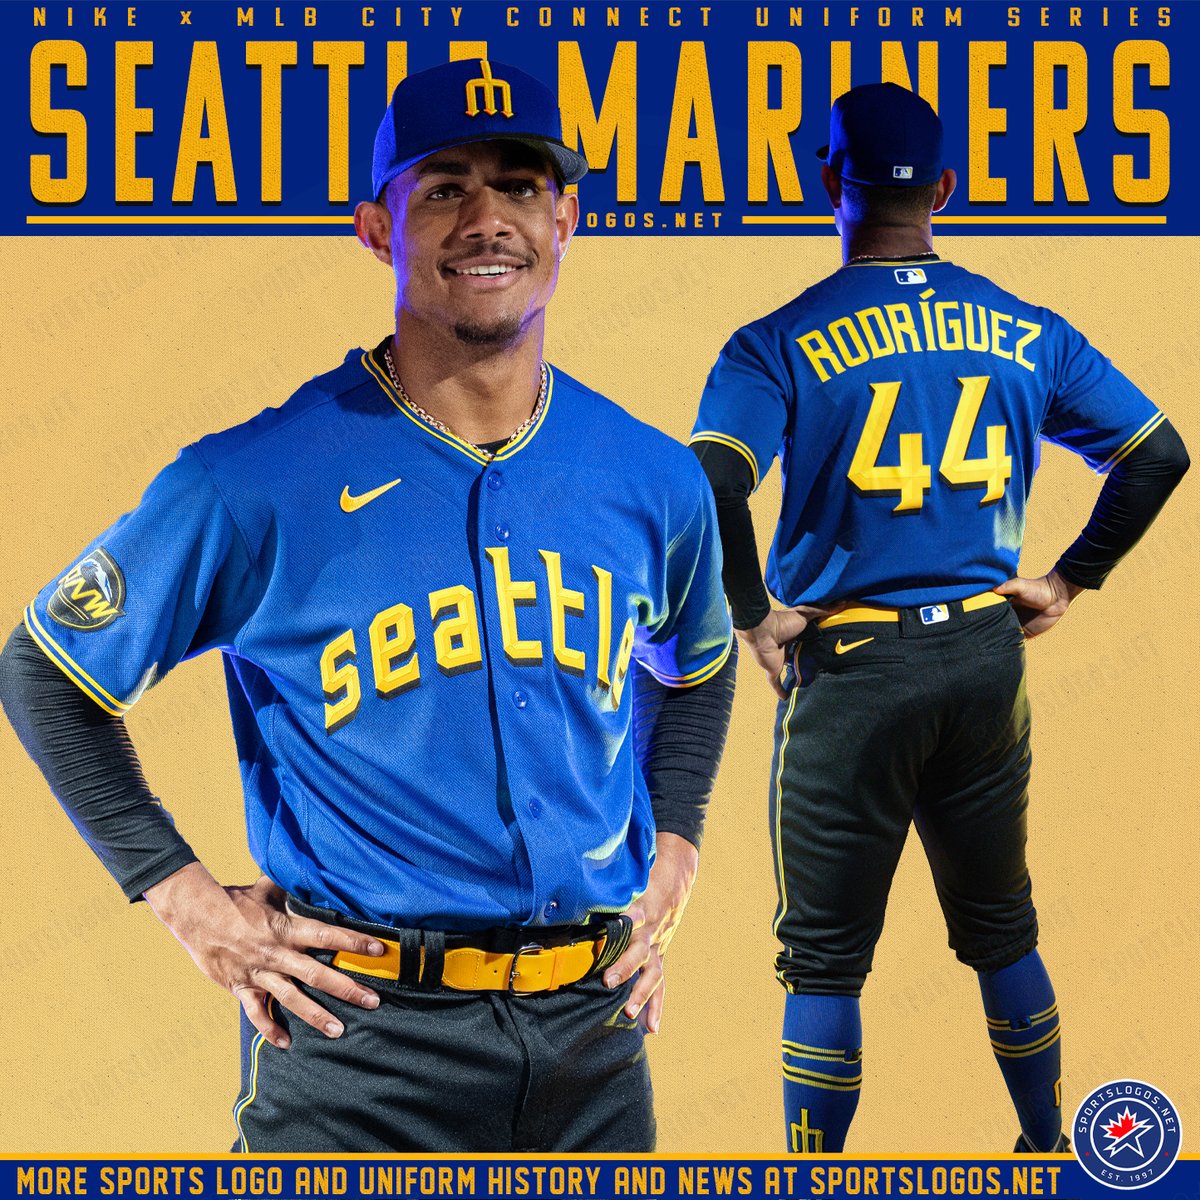 seattle mariners nike city connect